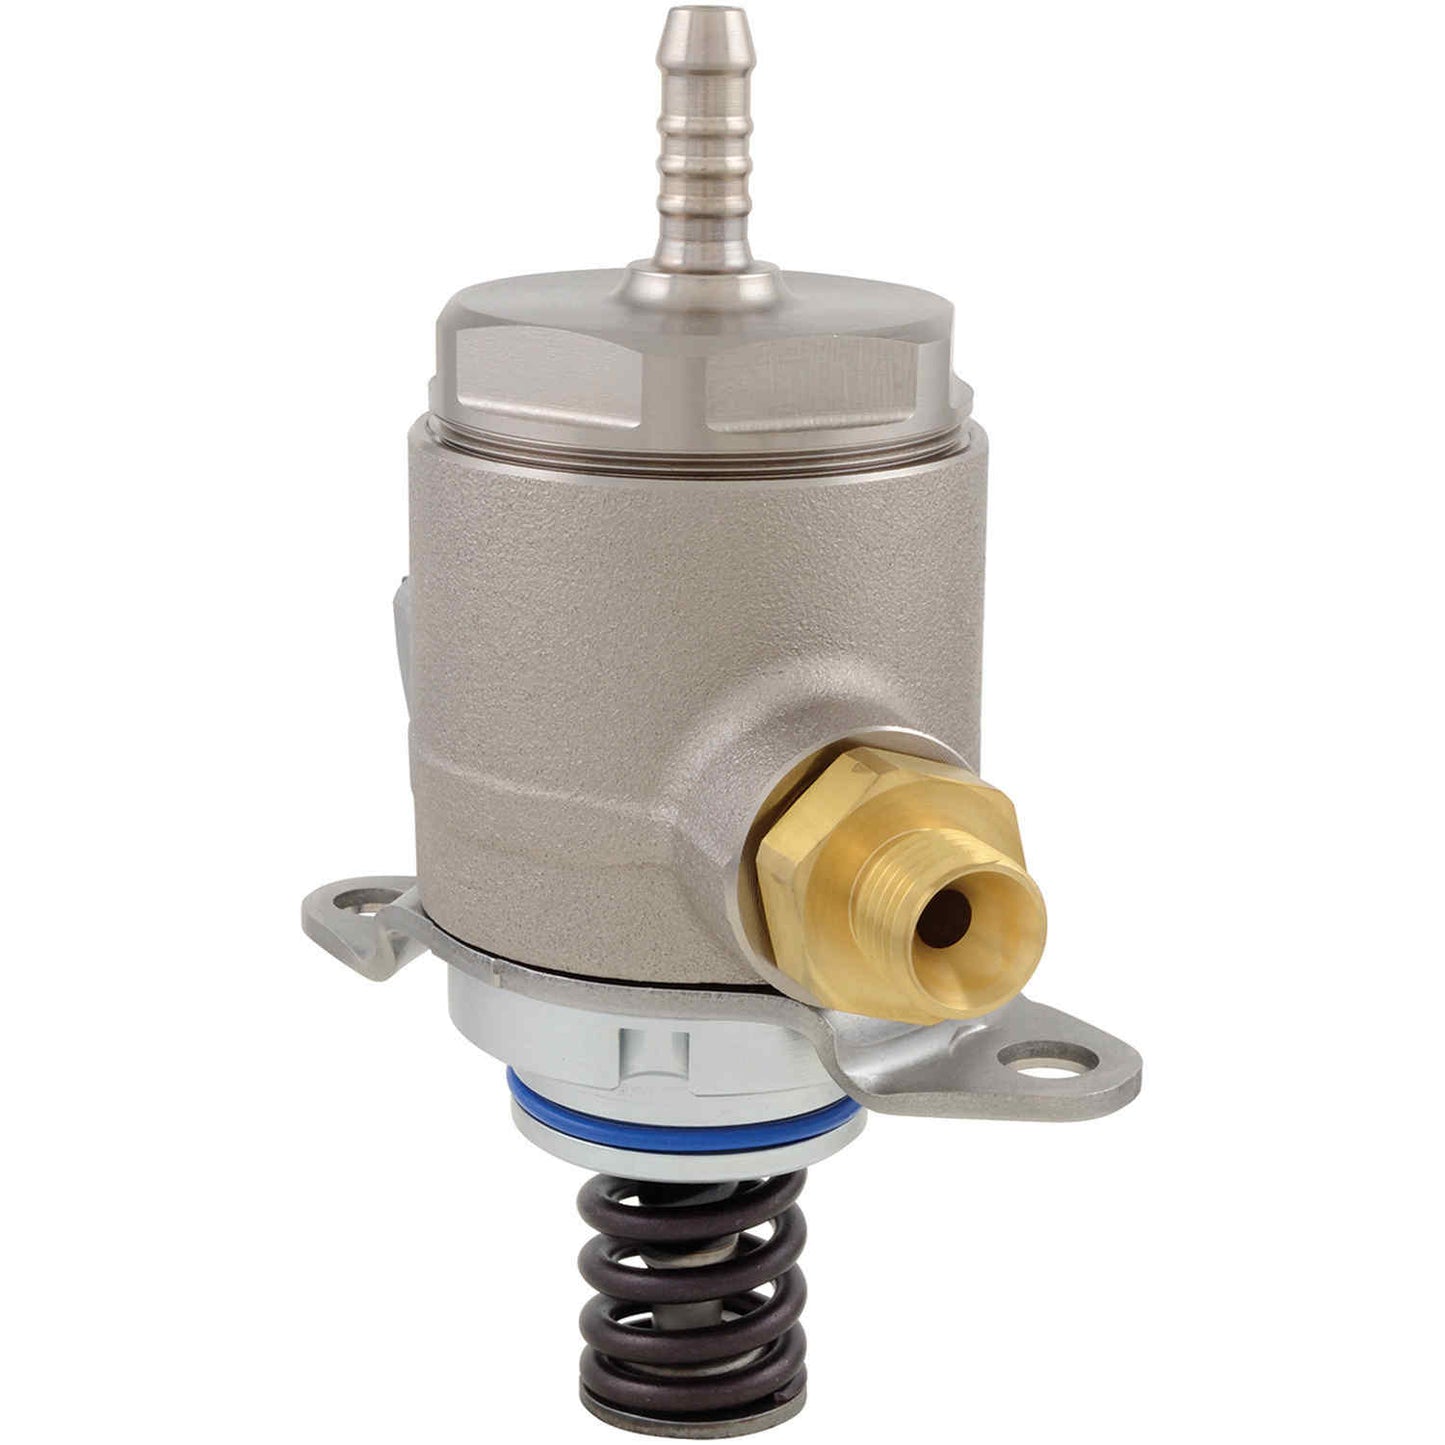 Right View of Direct Injection High Pressure Fuel Pump HITACHI HPP0010